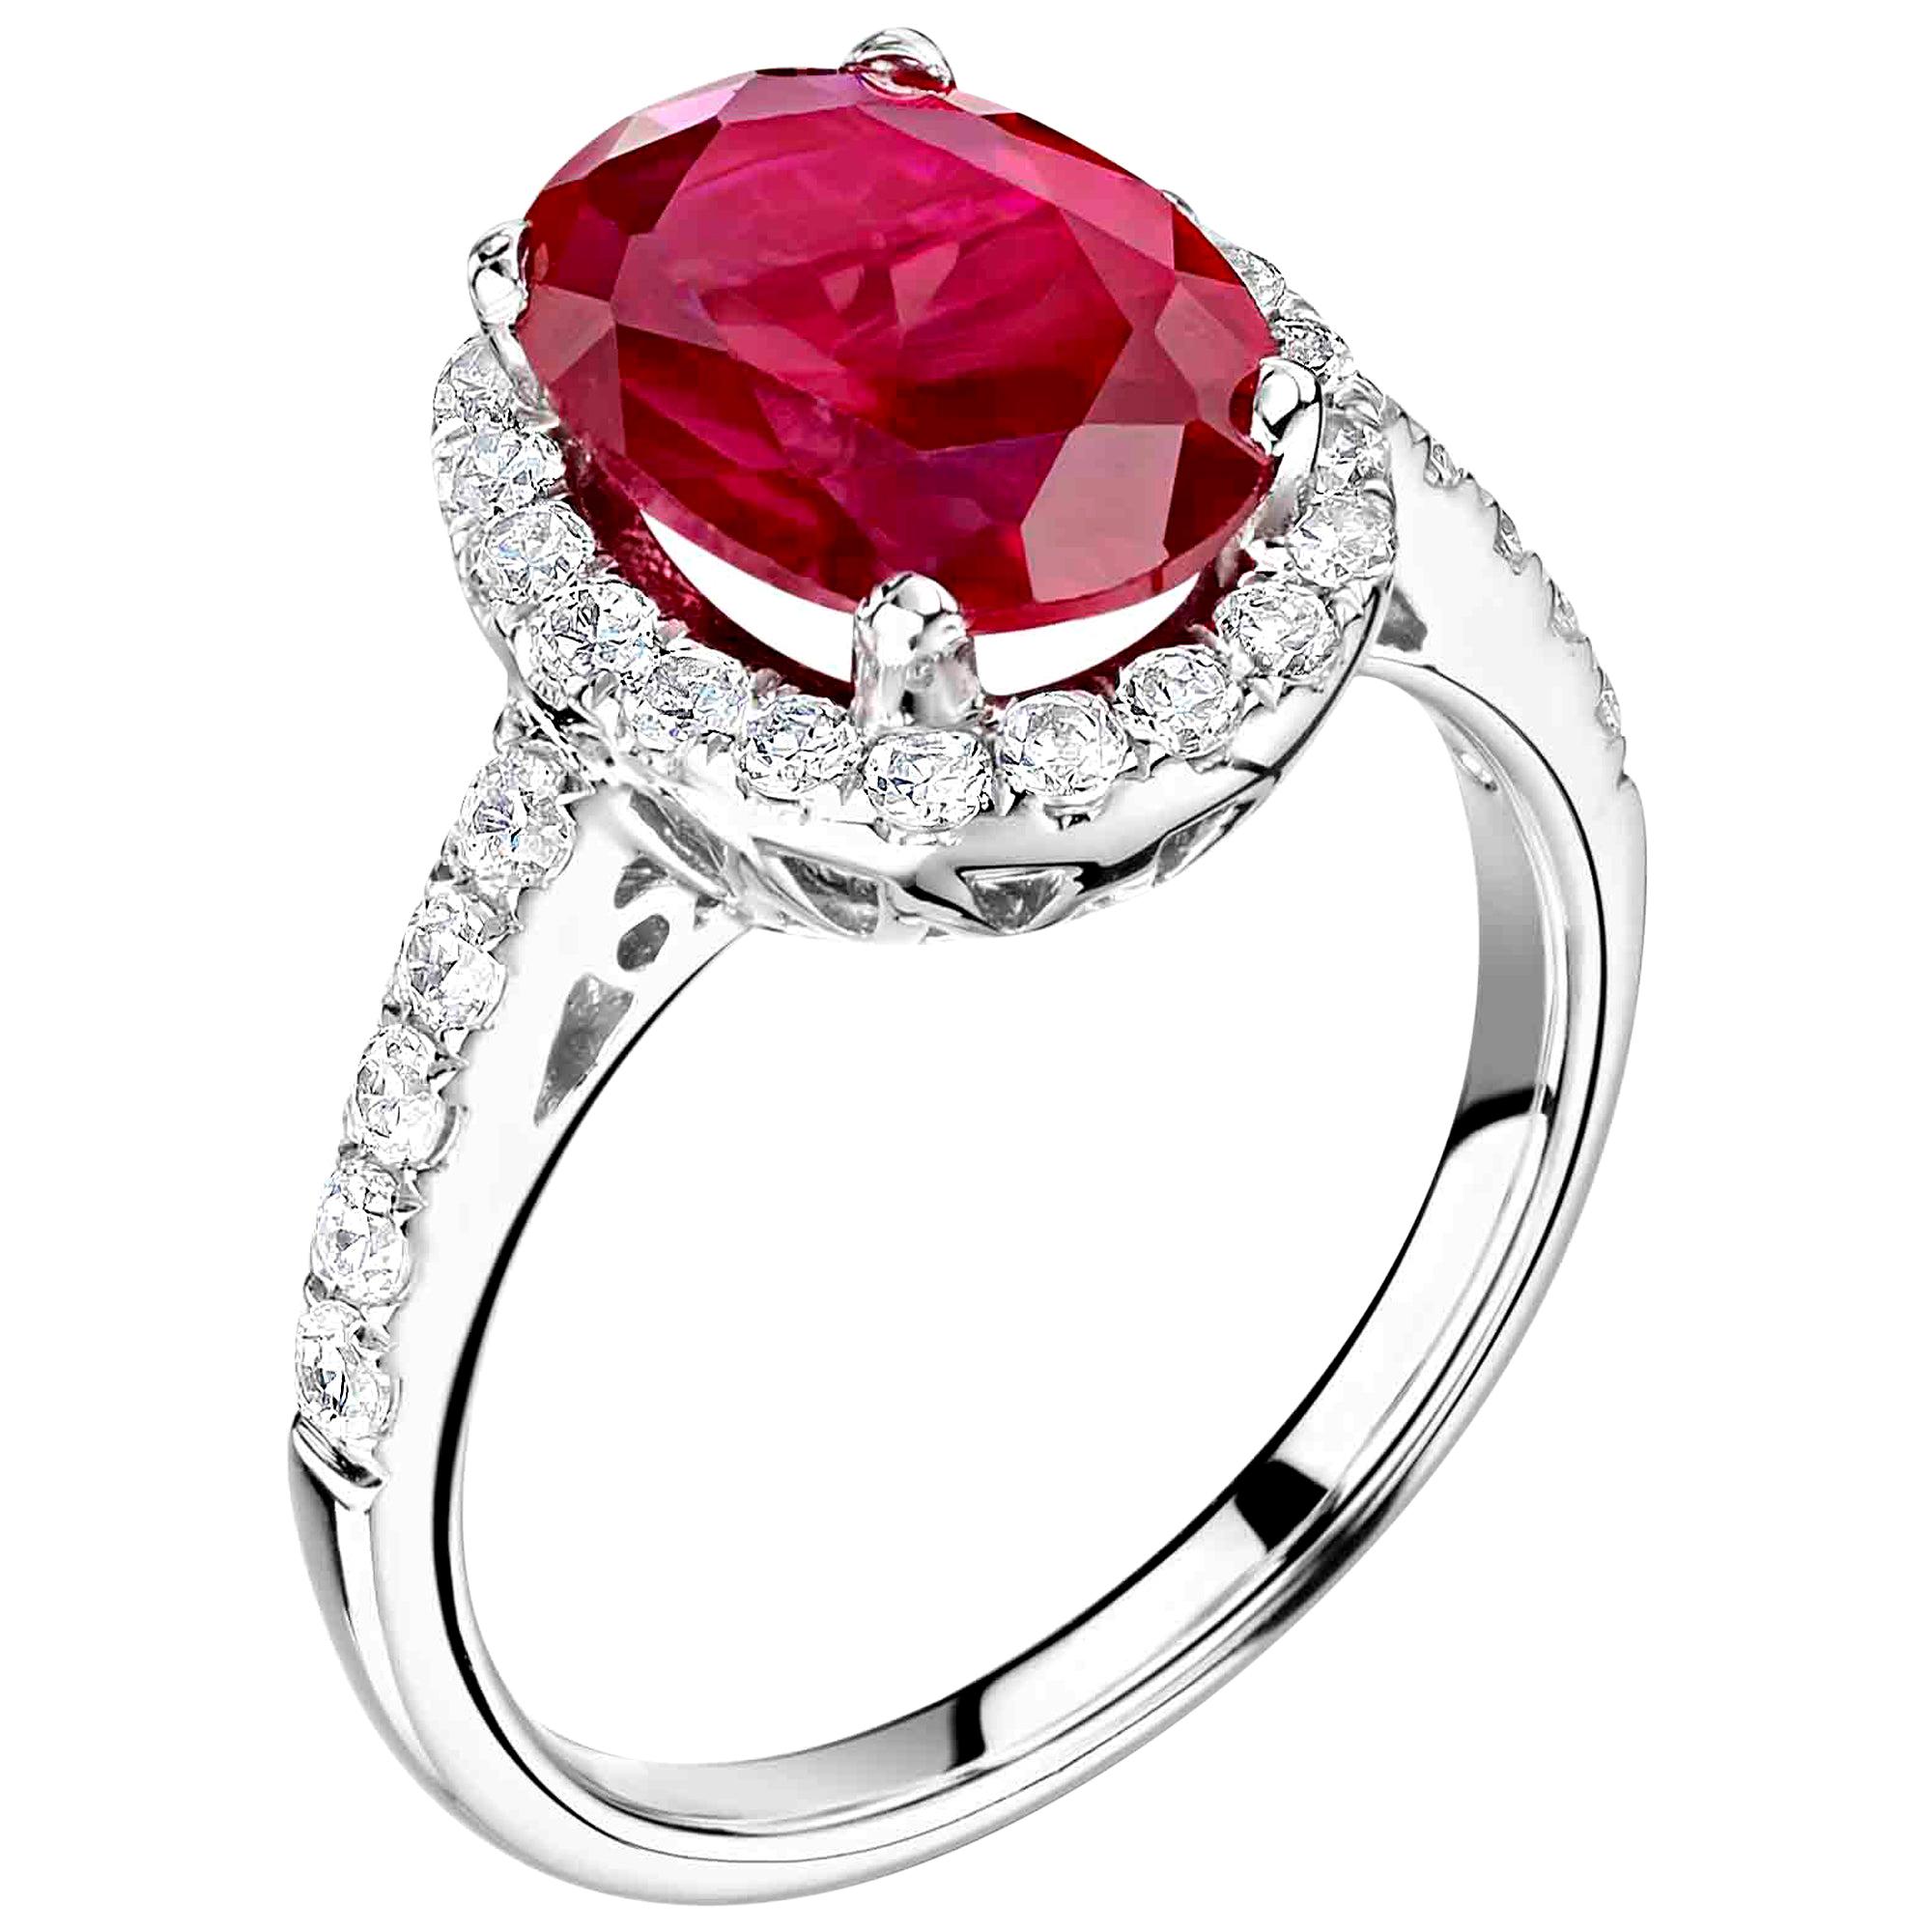 1 Carat Ruby and Diamond Bespoke Halo Ring in Platinum For Sale